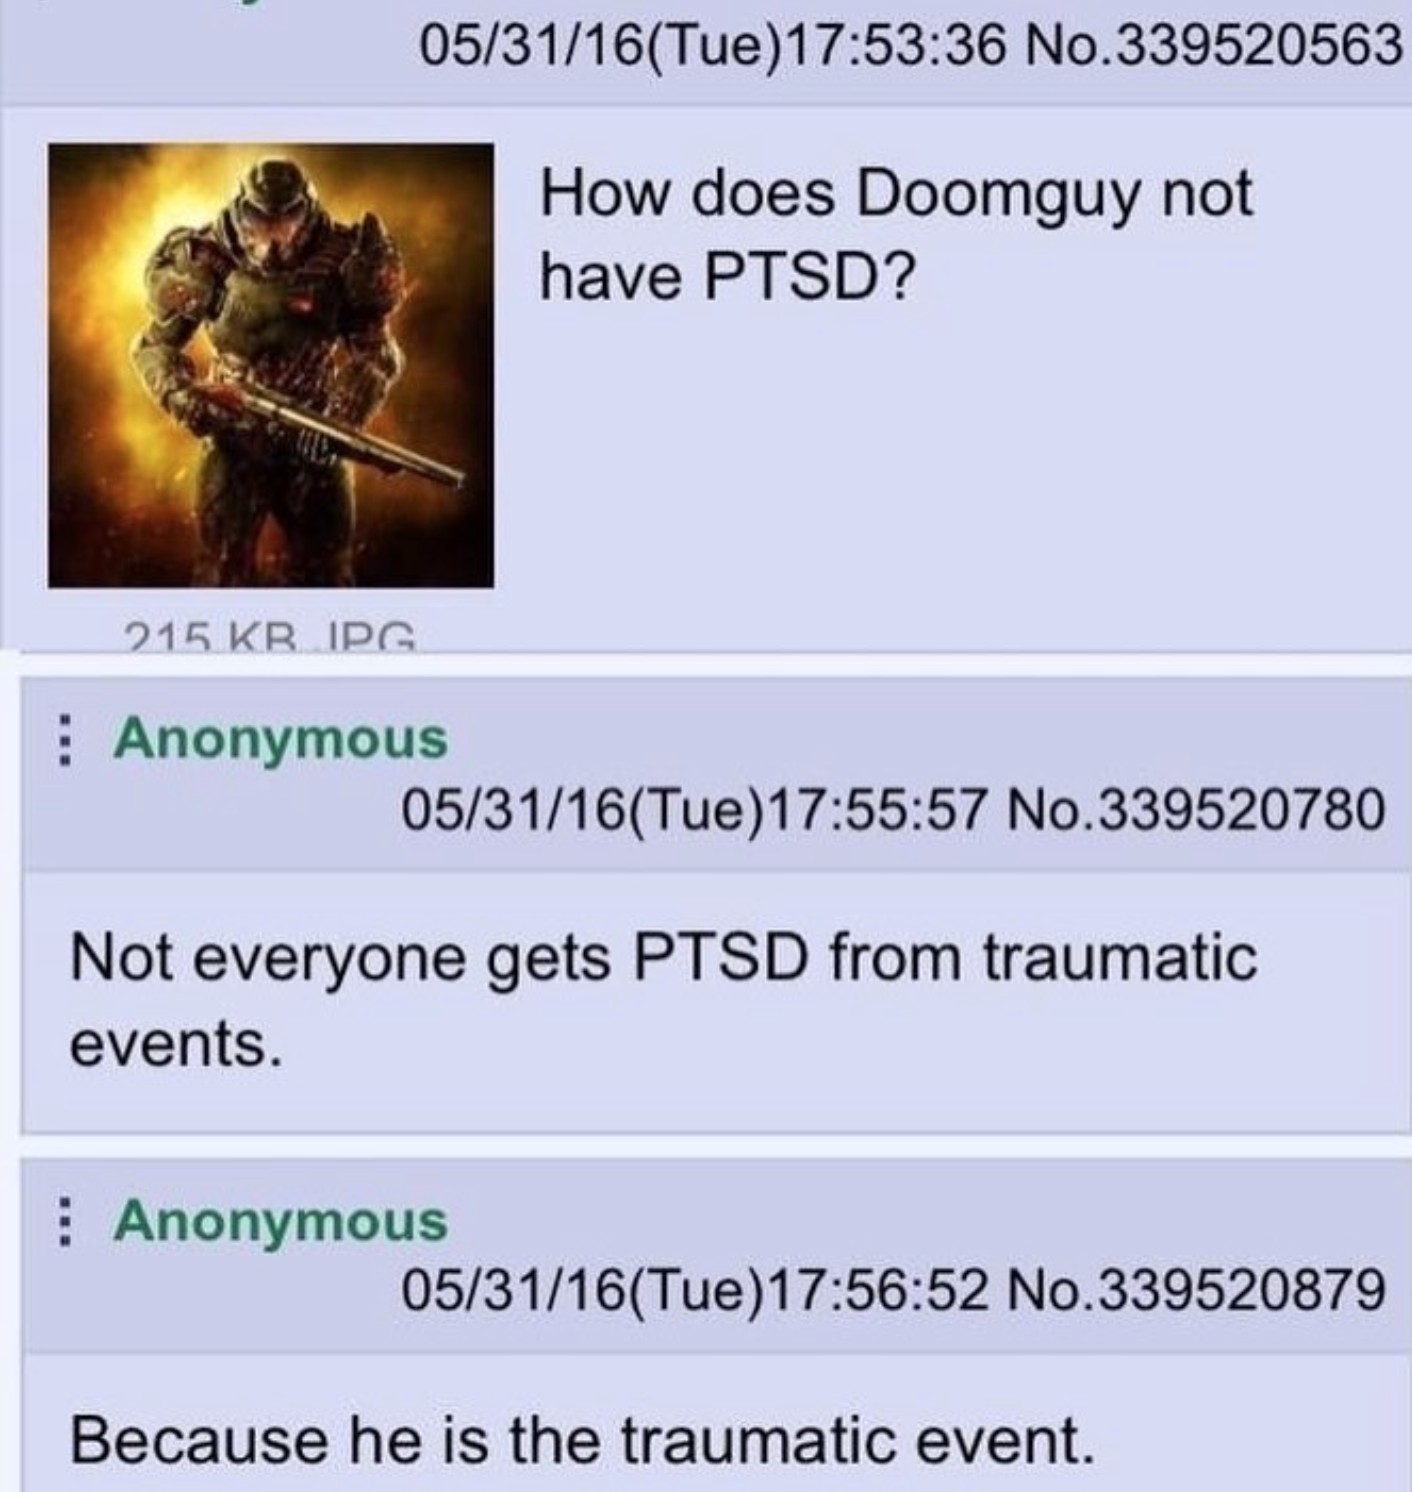 funny gaming memes - doom traumatic event - 053116Tue 36 No.339520563 How does Doomguy not have Ptsd? 215 Kripg Anonymous 053116Tue 57 No.339520780 Not everyone gets Ptsd from traumatic events. Anonymous 053116Tue52 No.339520879 Because he is the traumati